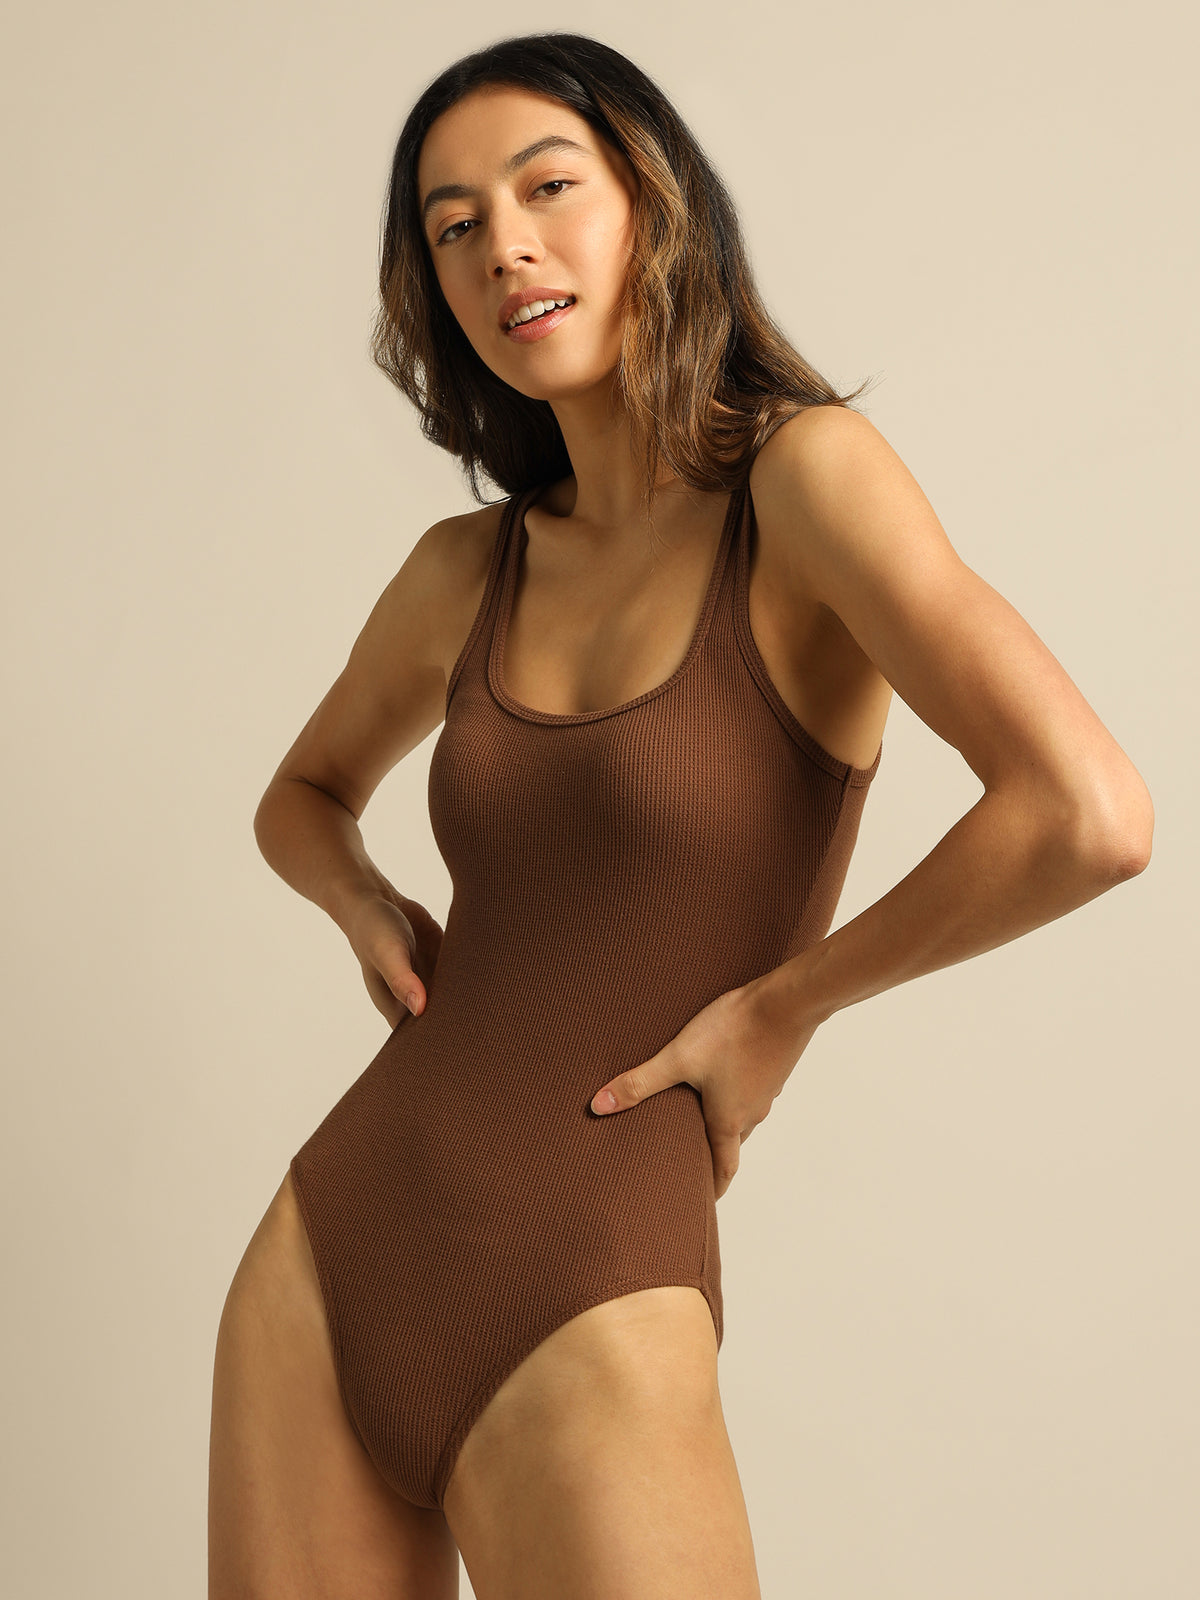 Dylan Waffle Bodysuit in Chocolate